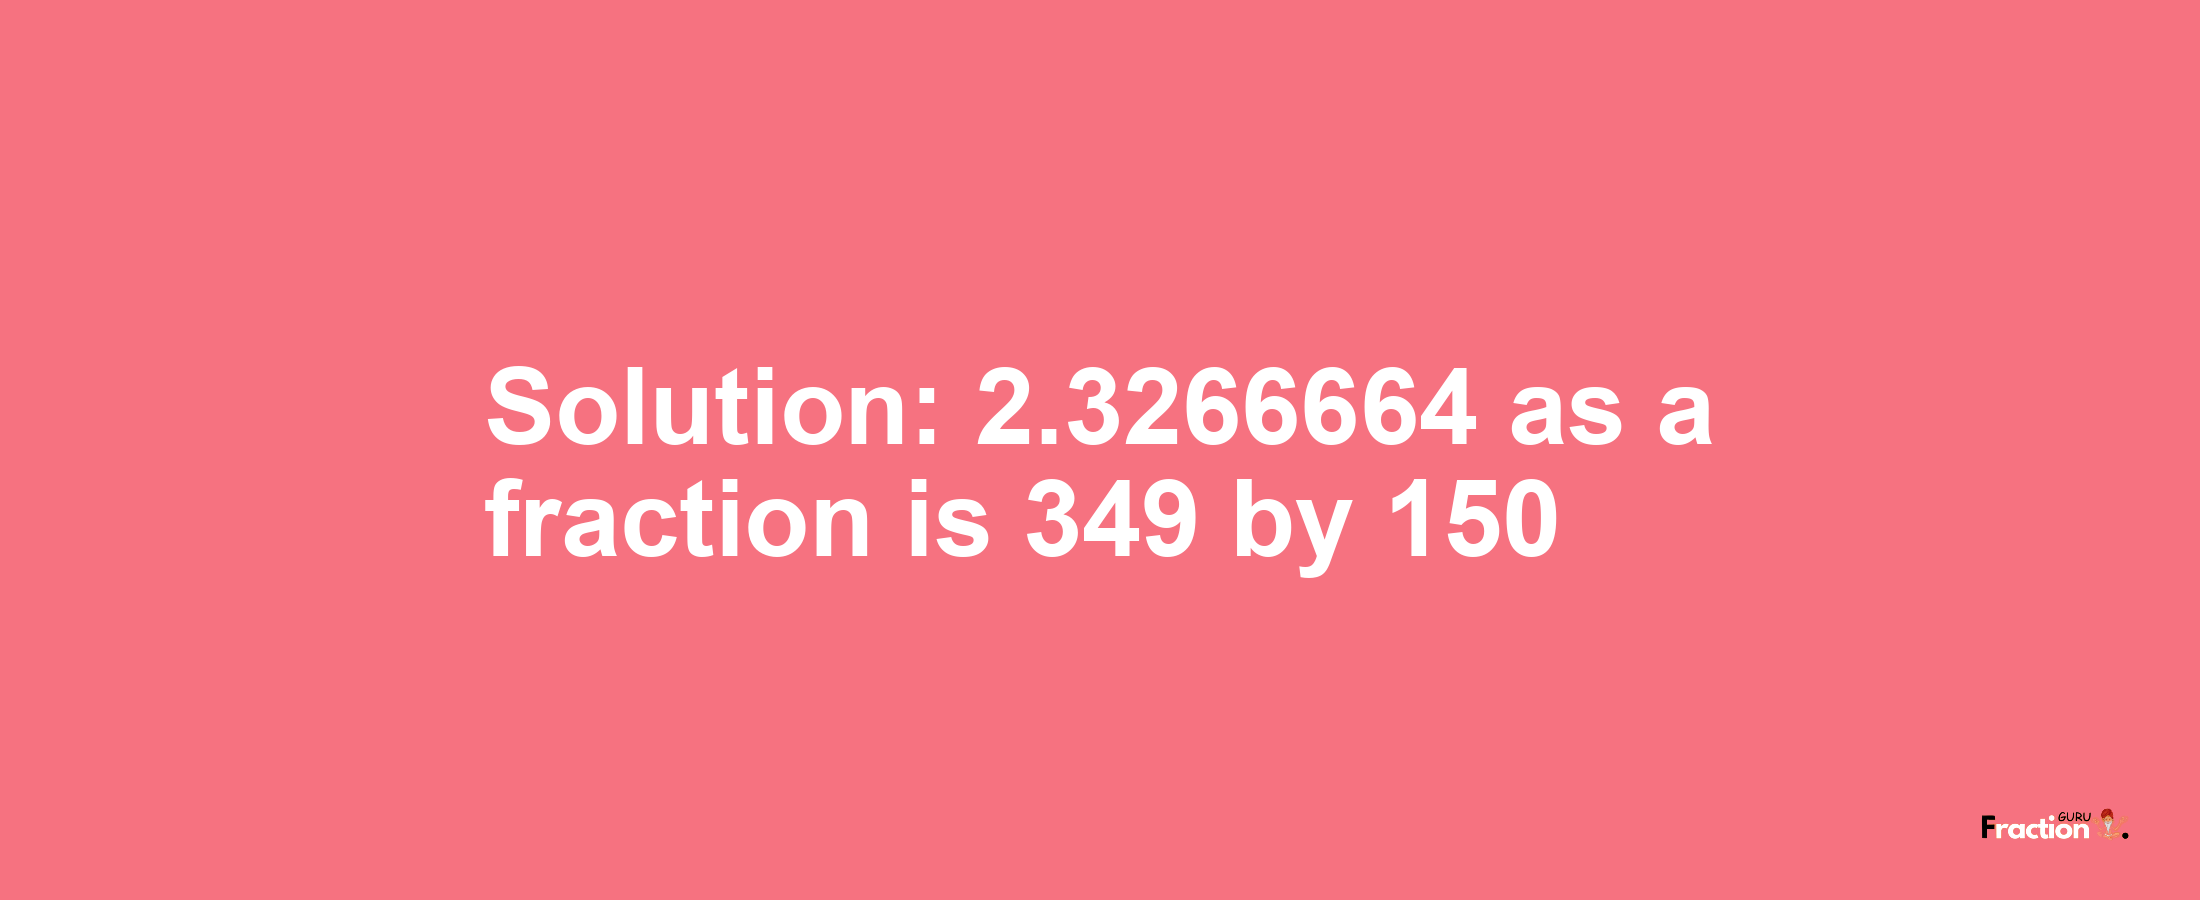 Solution:2.3266664 as a fraction is 349/150